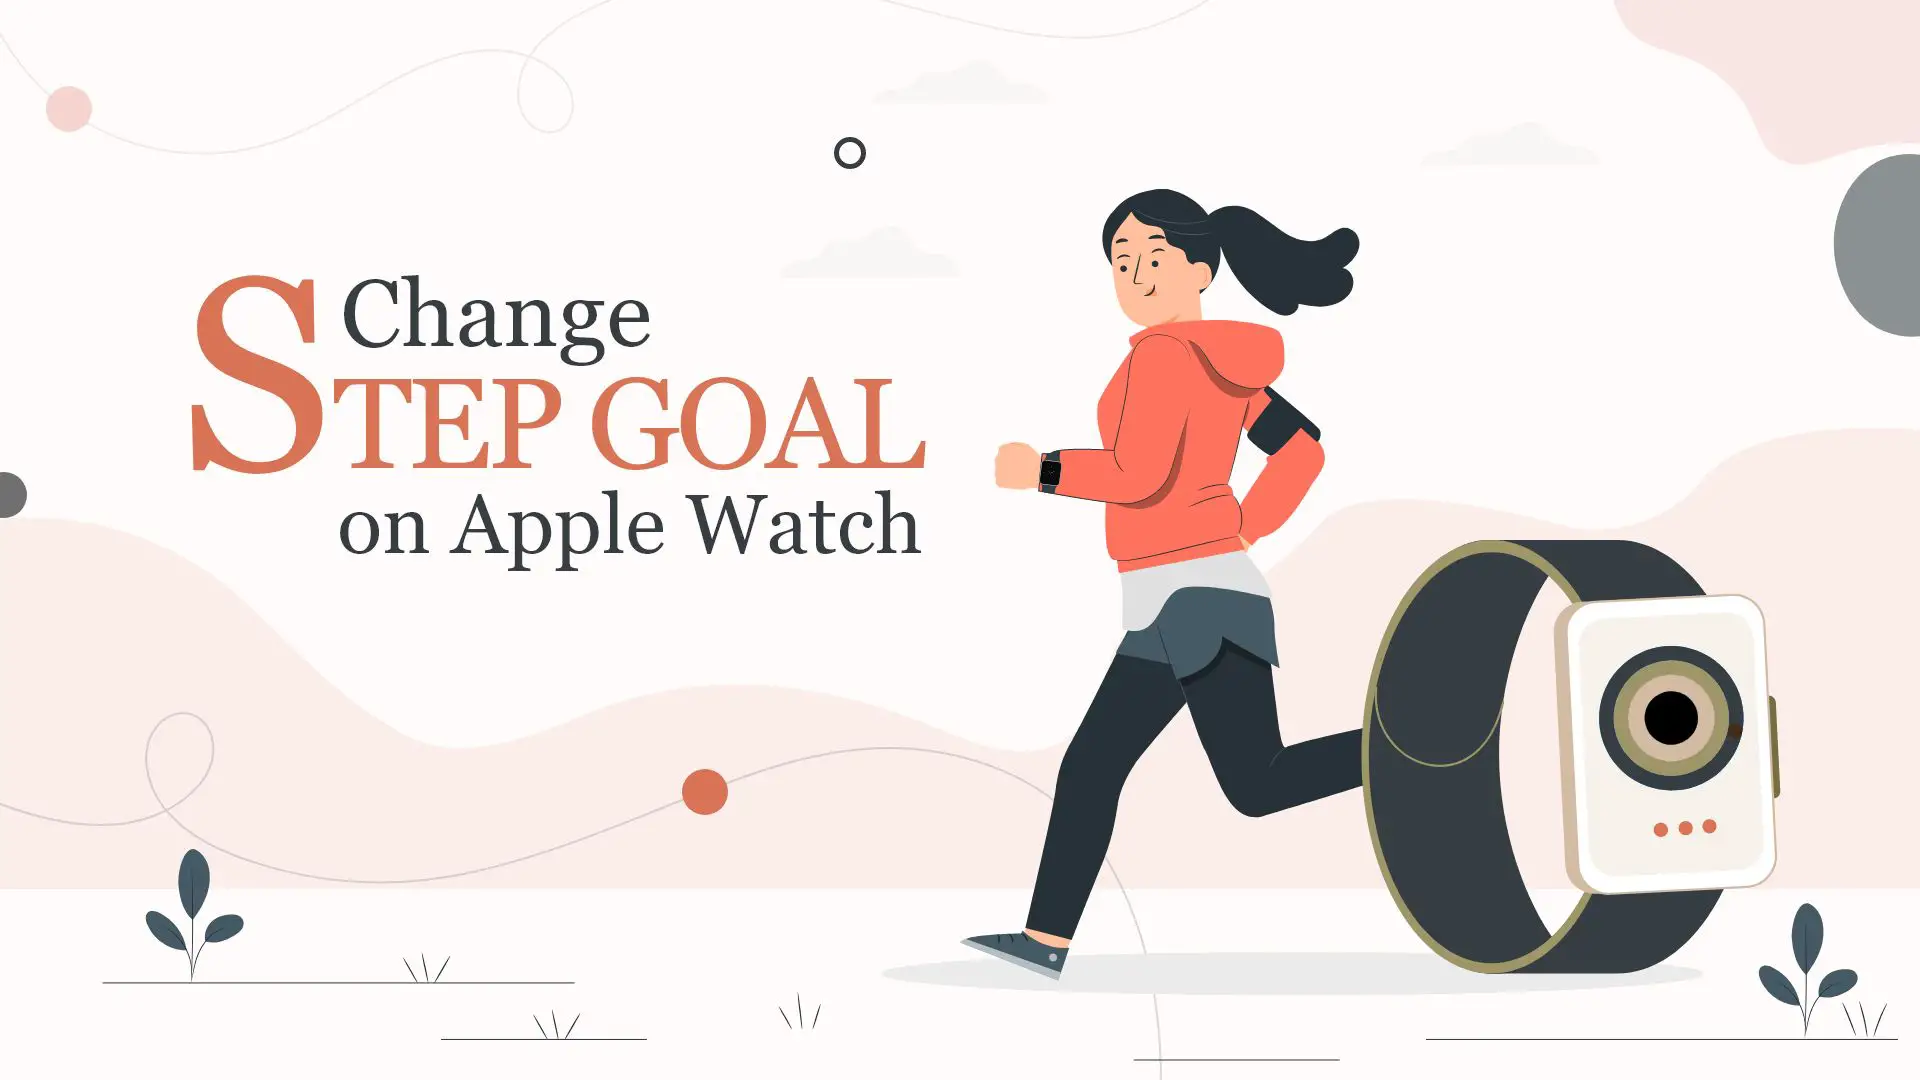 How to Change Step Goal on Apple Watch